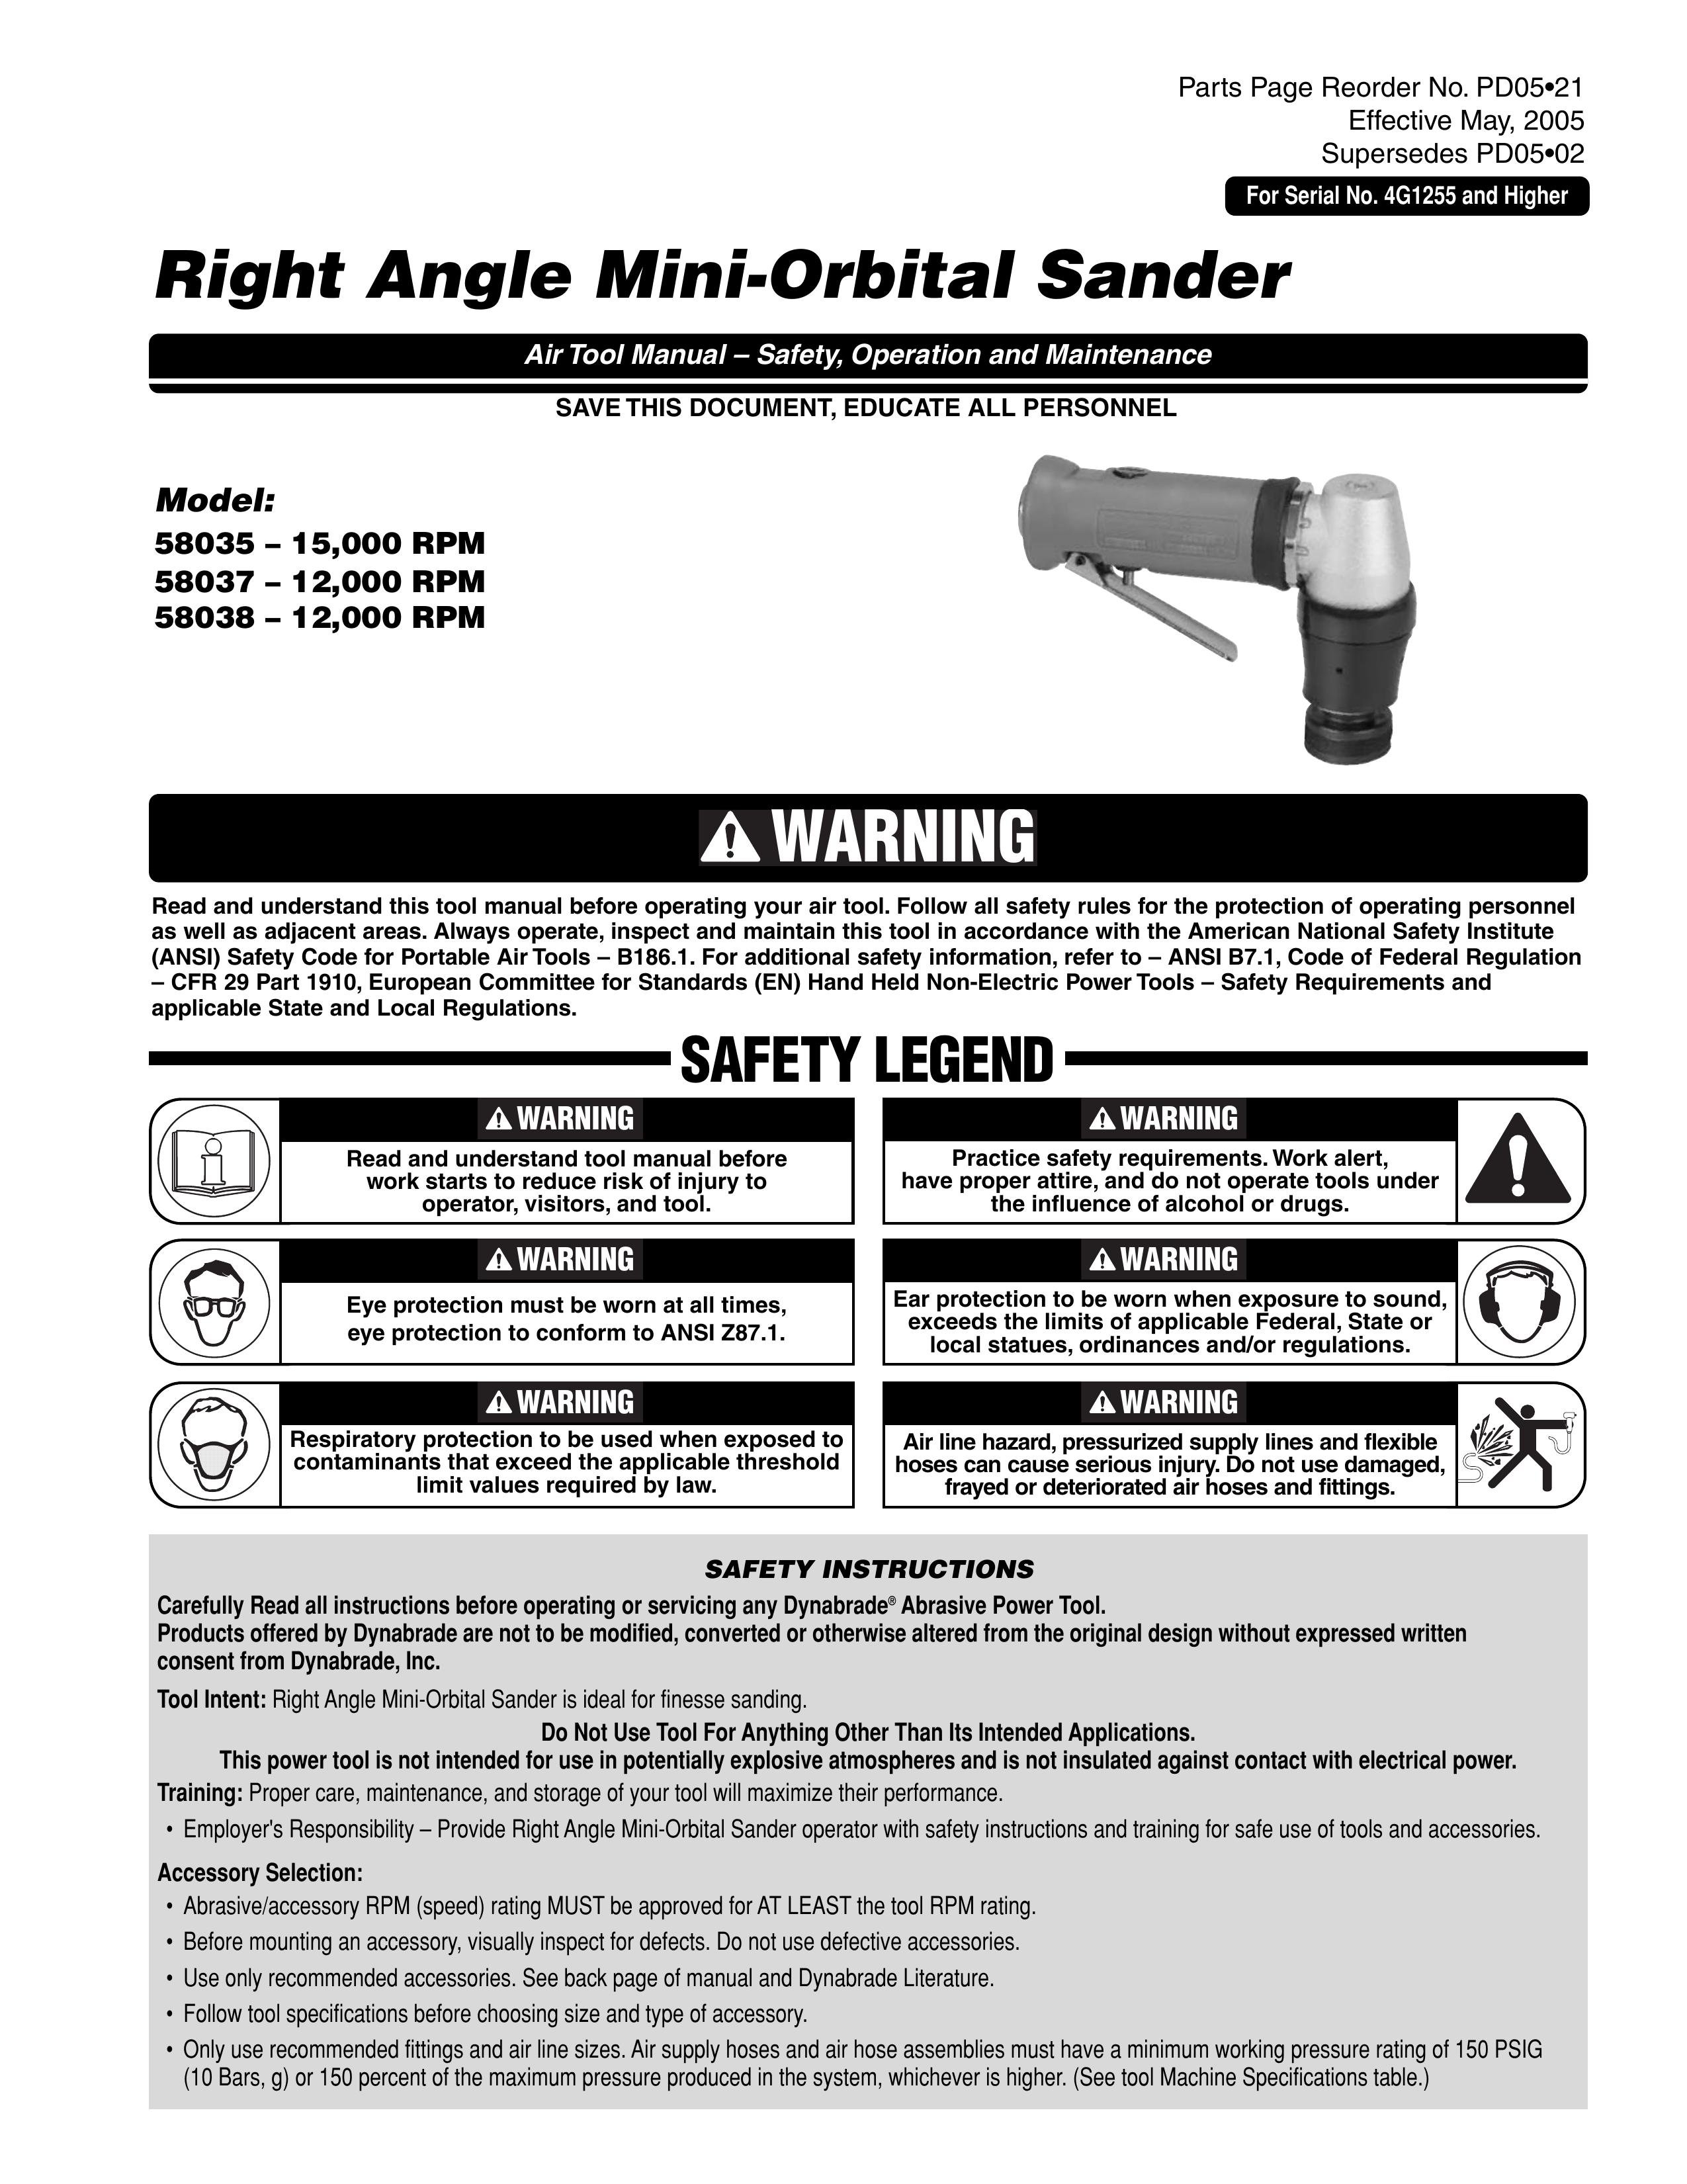 Dynabrade PD0502 Camera Accessories User Manual